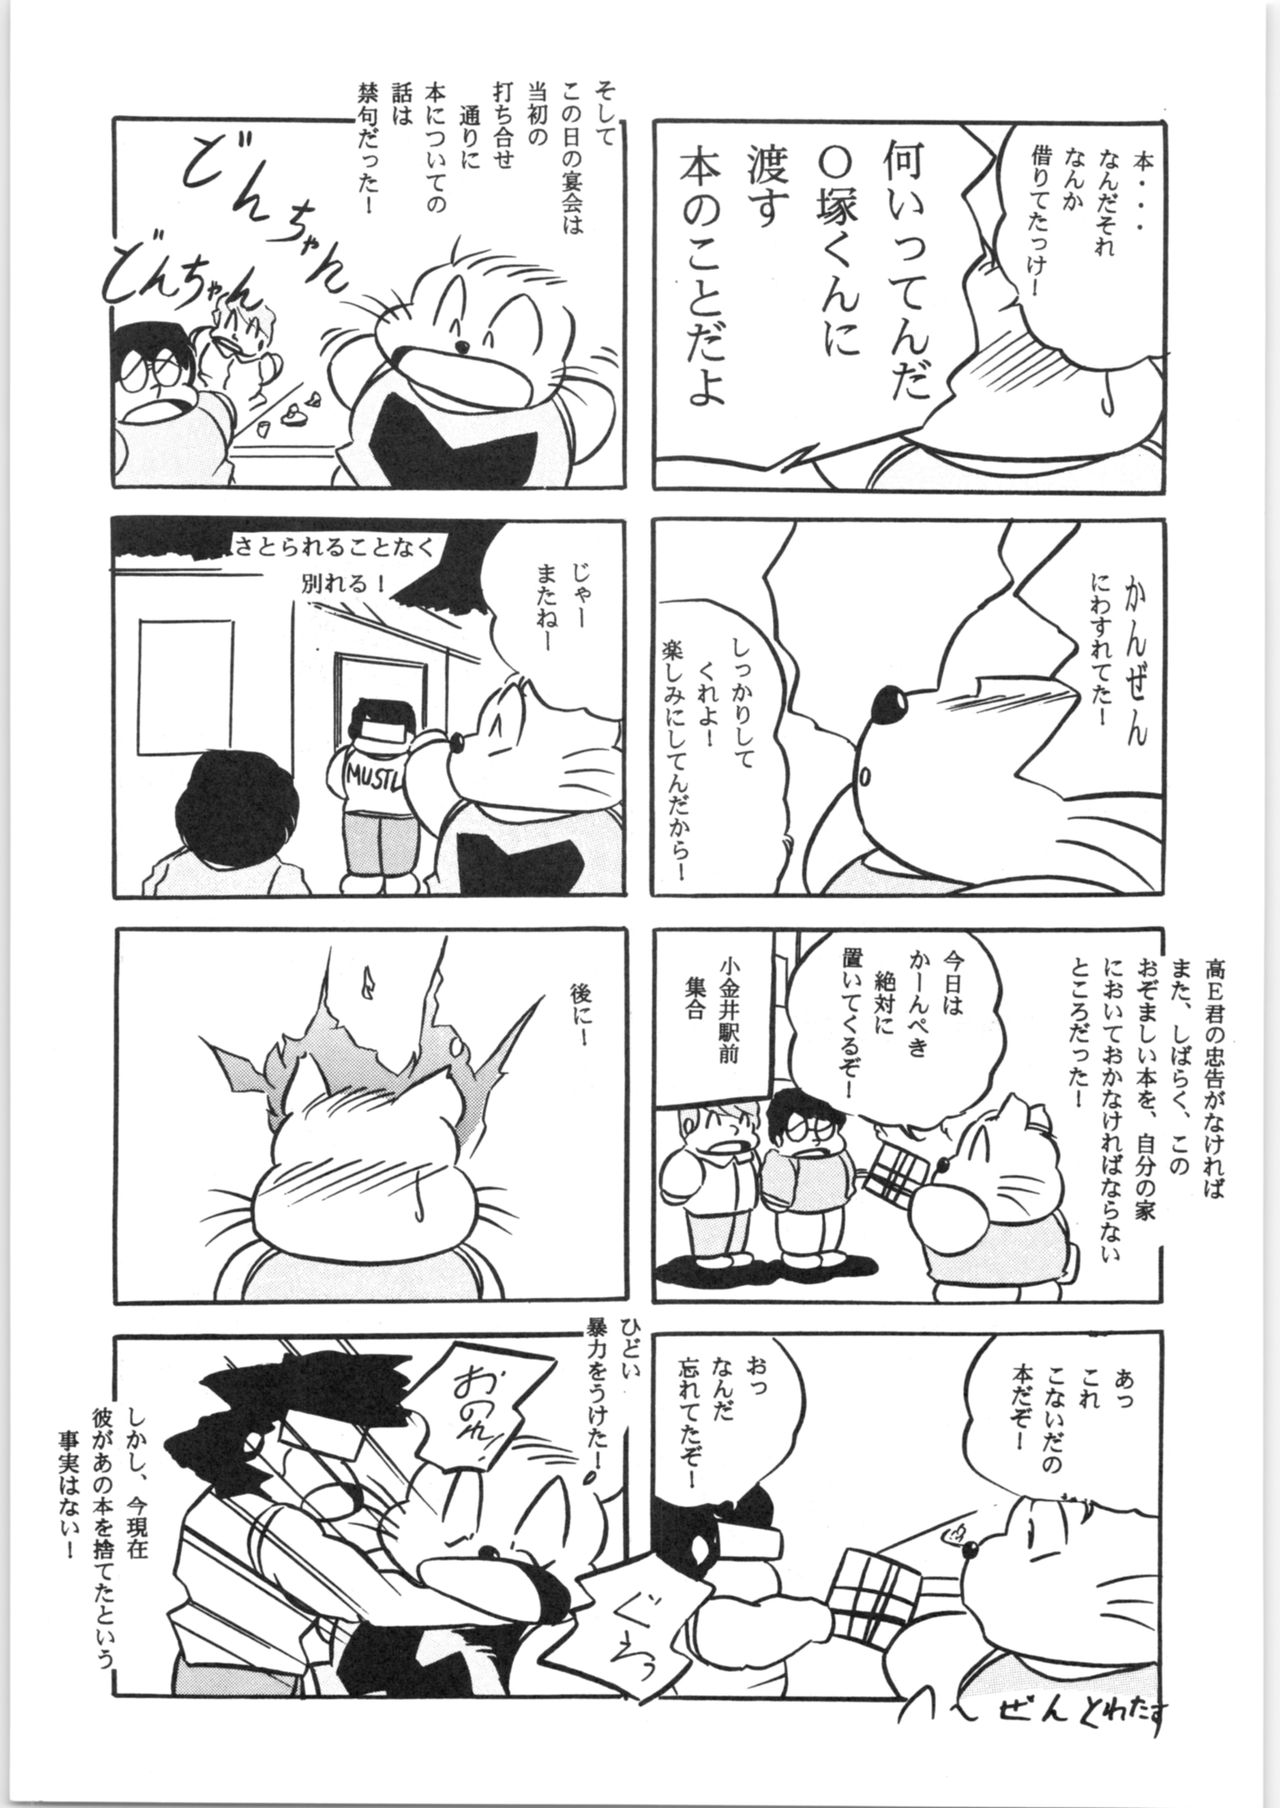 [C-COMPANY] C-COMPANY SPECIAL STAGE 18 (Ranma 1/2, Idol Project) page 40 full